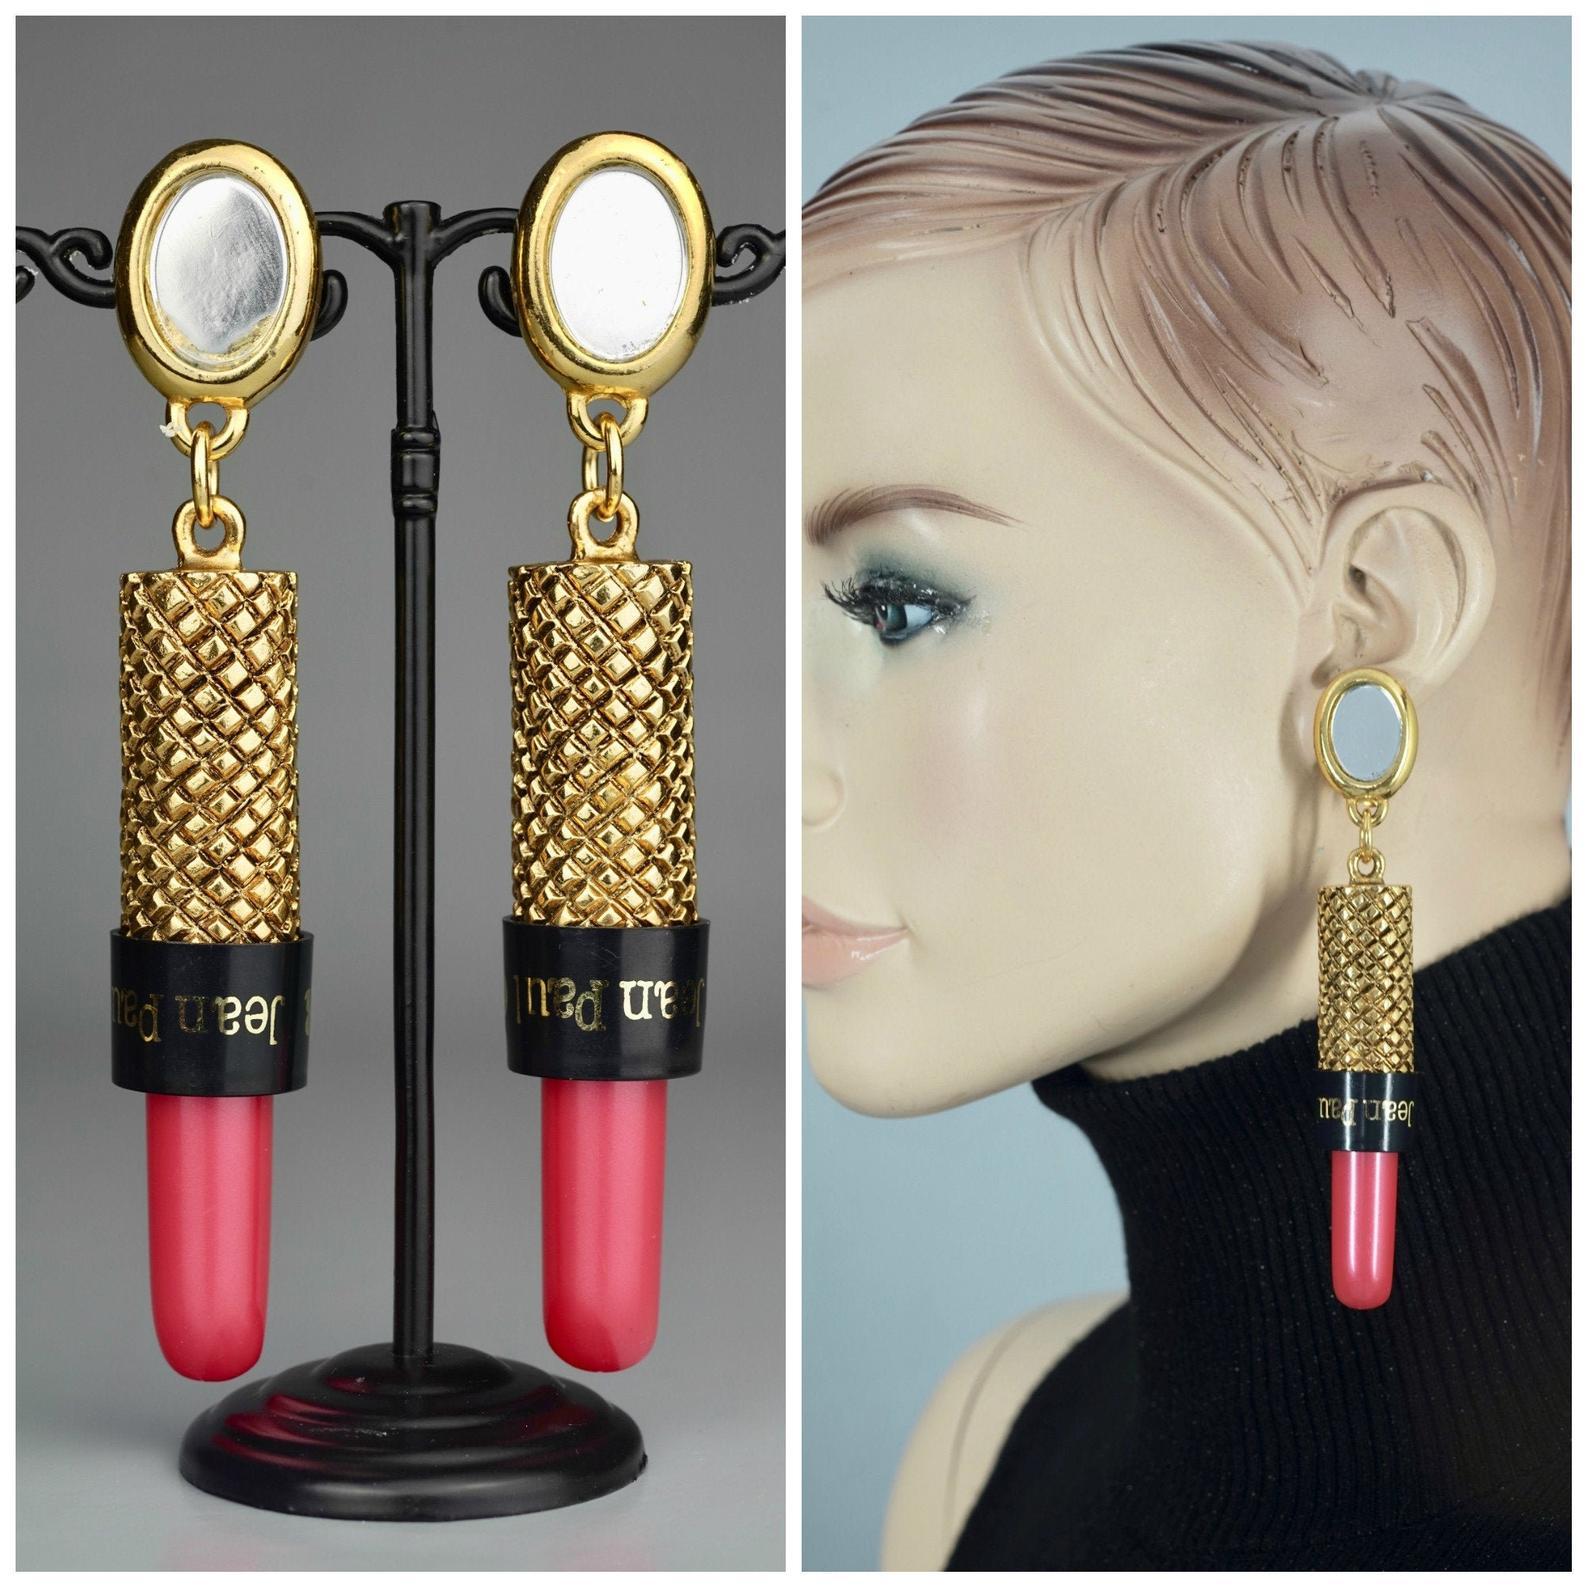 Vintage Rare JEAN PAUL GAULTIER Lipstick Drop Earrings

Measurements:
Height: 4.65 inches (11.8 cm)
Width: 0.79 inch (2 cm)
Weight: 23 grams

Features:
- 100% Authentic JEAN PAUL GAULTIER.
- Massive novelty mirror and lipstick drop earrings.
- Gold